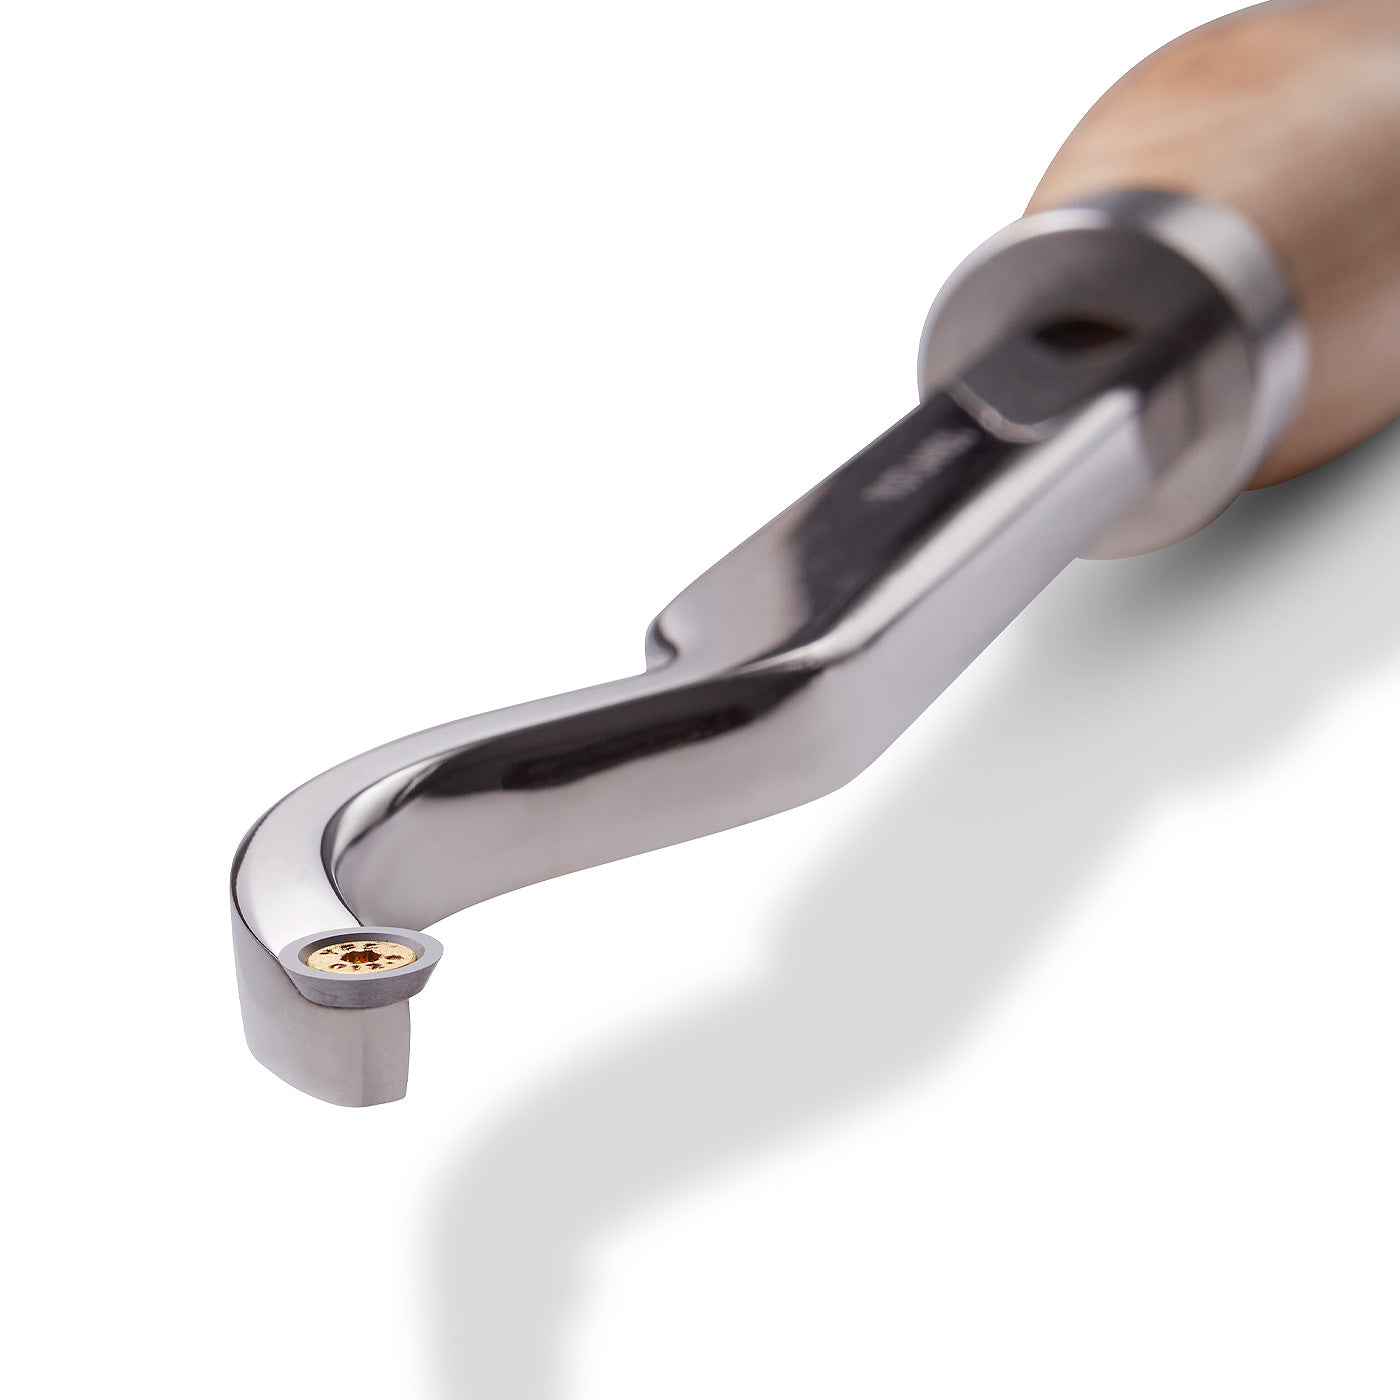 K10 Carbide Hollowing Tool - Gentle Curve